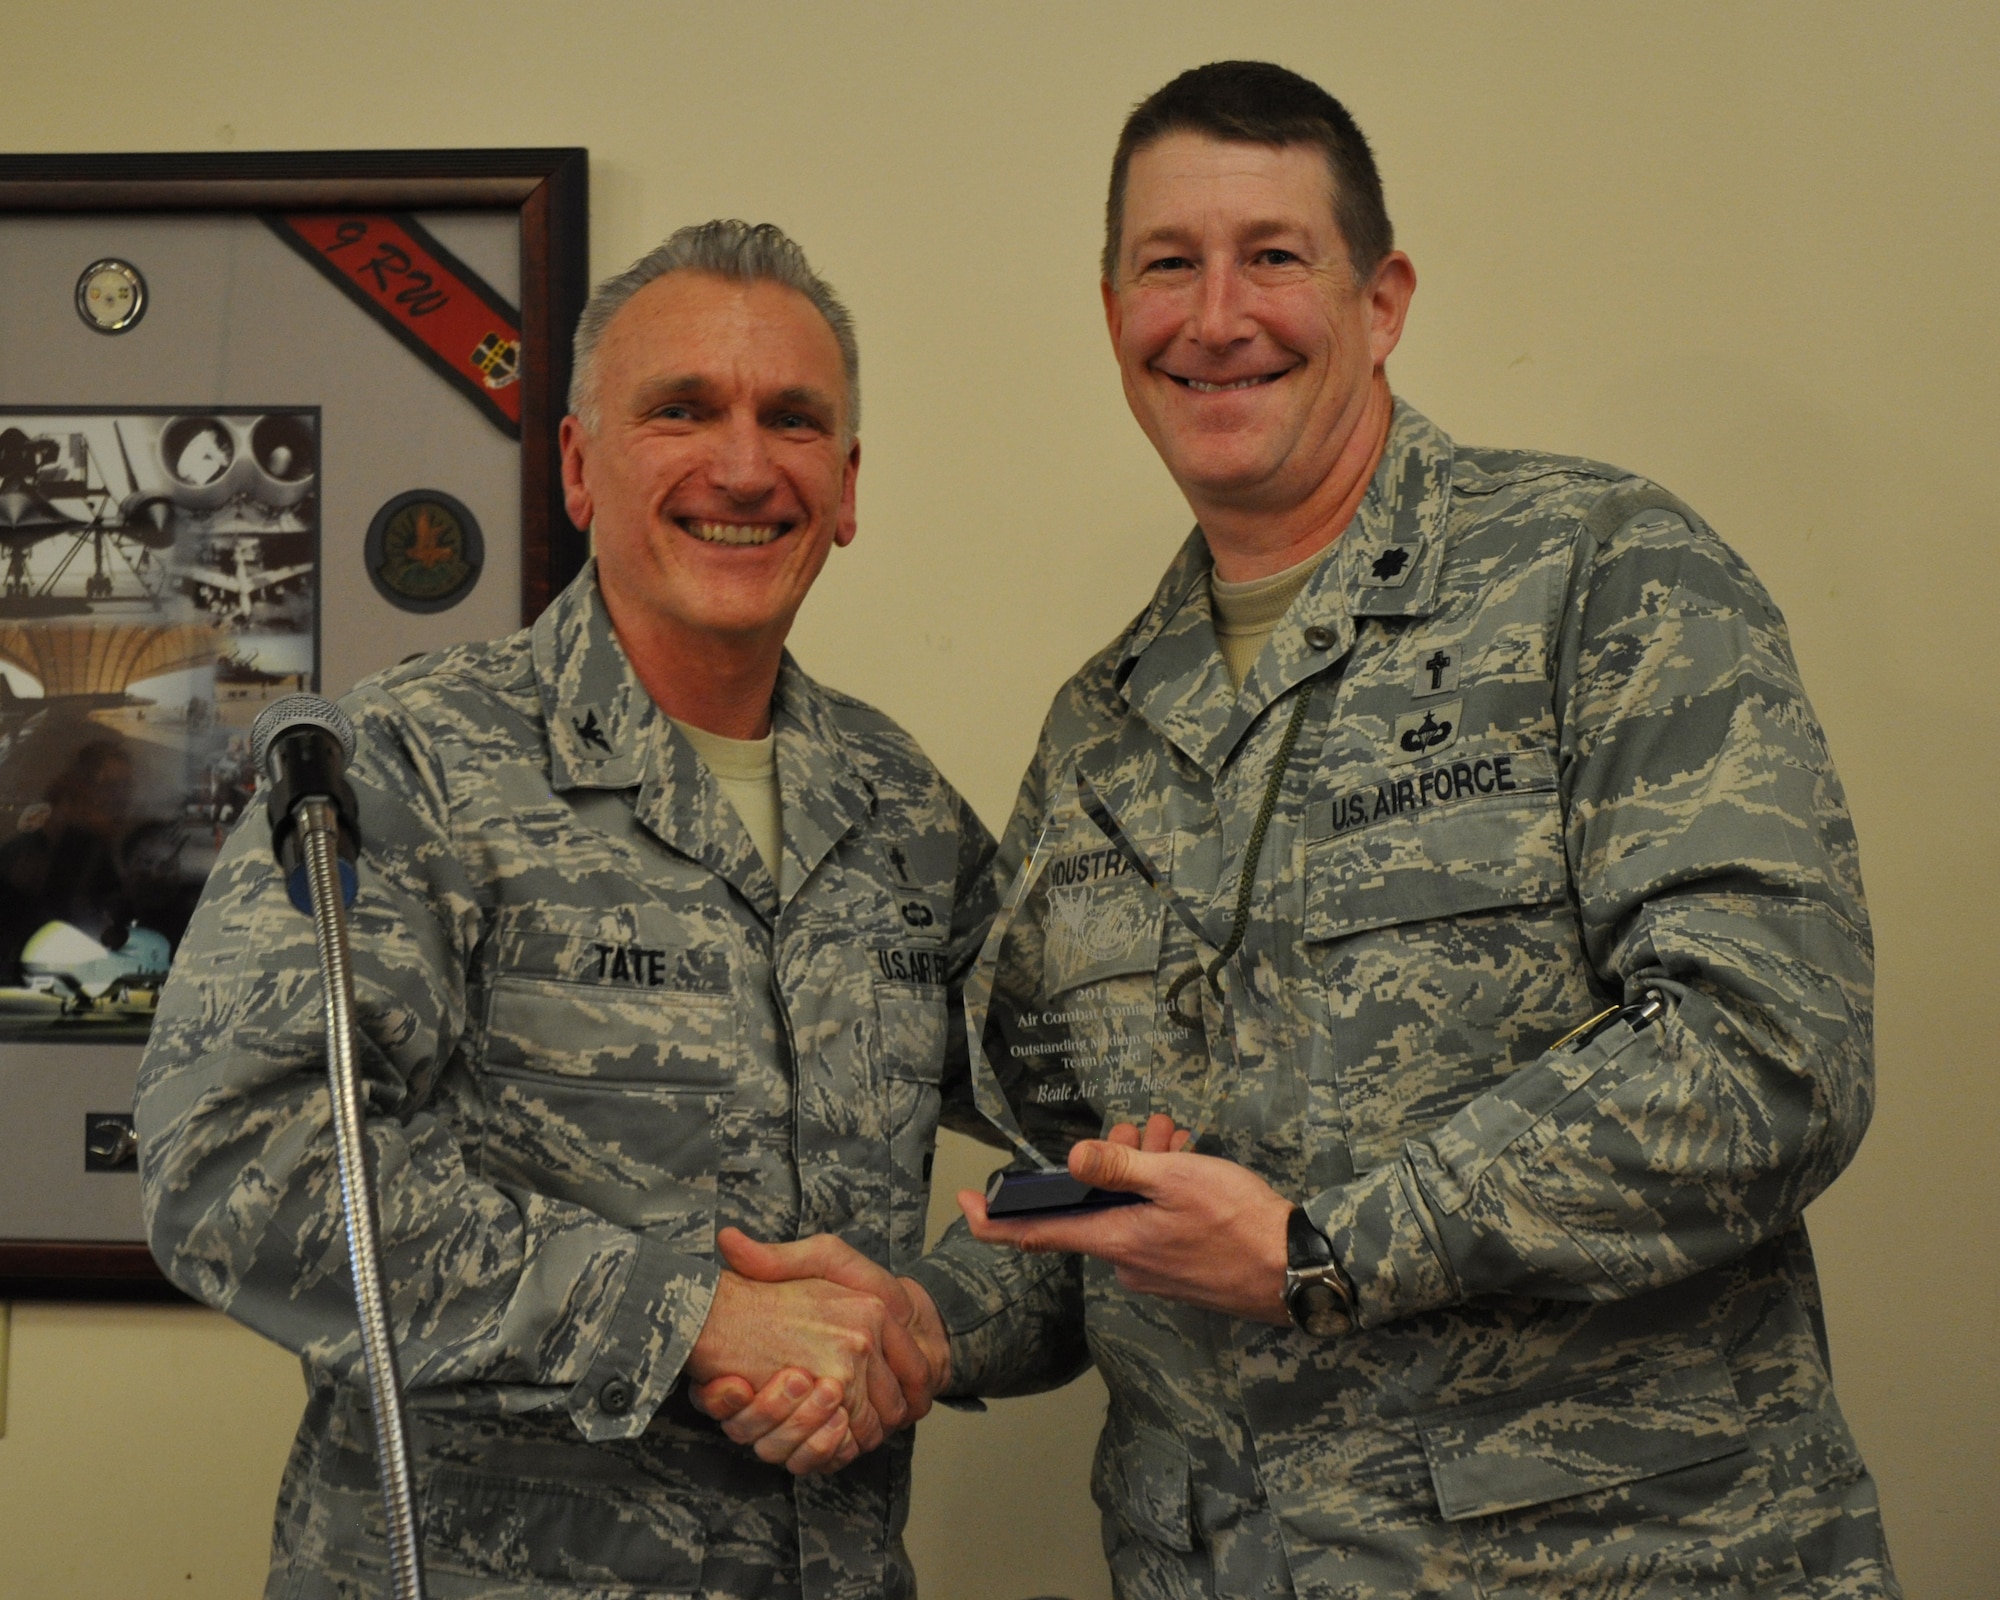 Chaplain (Col.) Gregory L. Tate, Command Chaplain for Air Combat Command, presents Chaplain (Lt. Col.) George T. Youstra, 9th Reconnaissance Wing, with the 2011 ACC Outstanding Medium Chapel Team Award at the National Prayer Luncheon at Beale Air Force Base Calif., Feb. 16, 2012. Chaplain Tate was the guest speaker at the luncheon and was on hand to present the ACC level award to Beale. (U.S. Air Force photo by Staff Sgt. Robert M. Trujillo/Released)